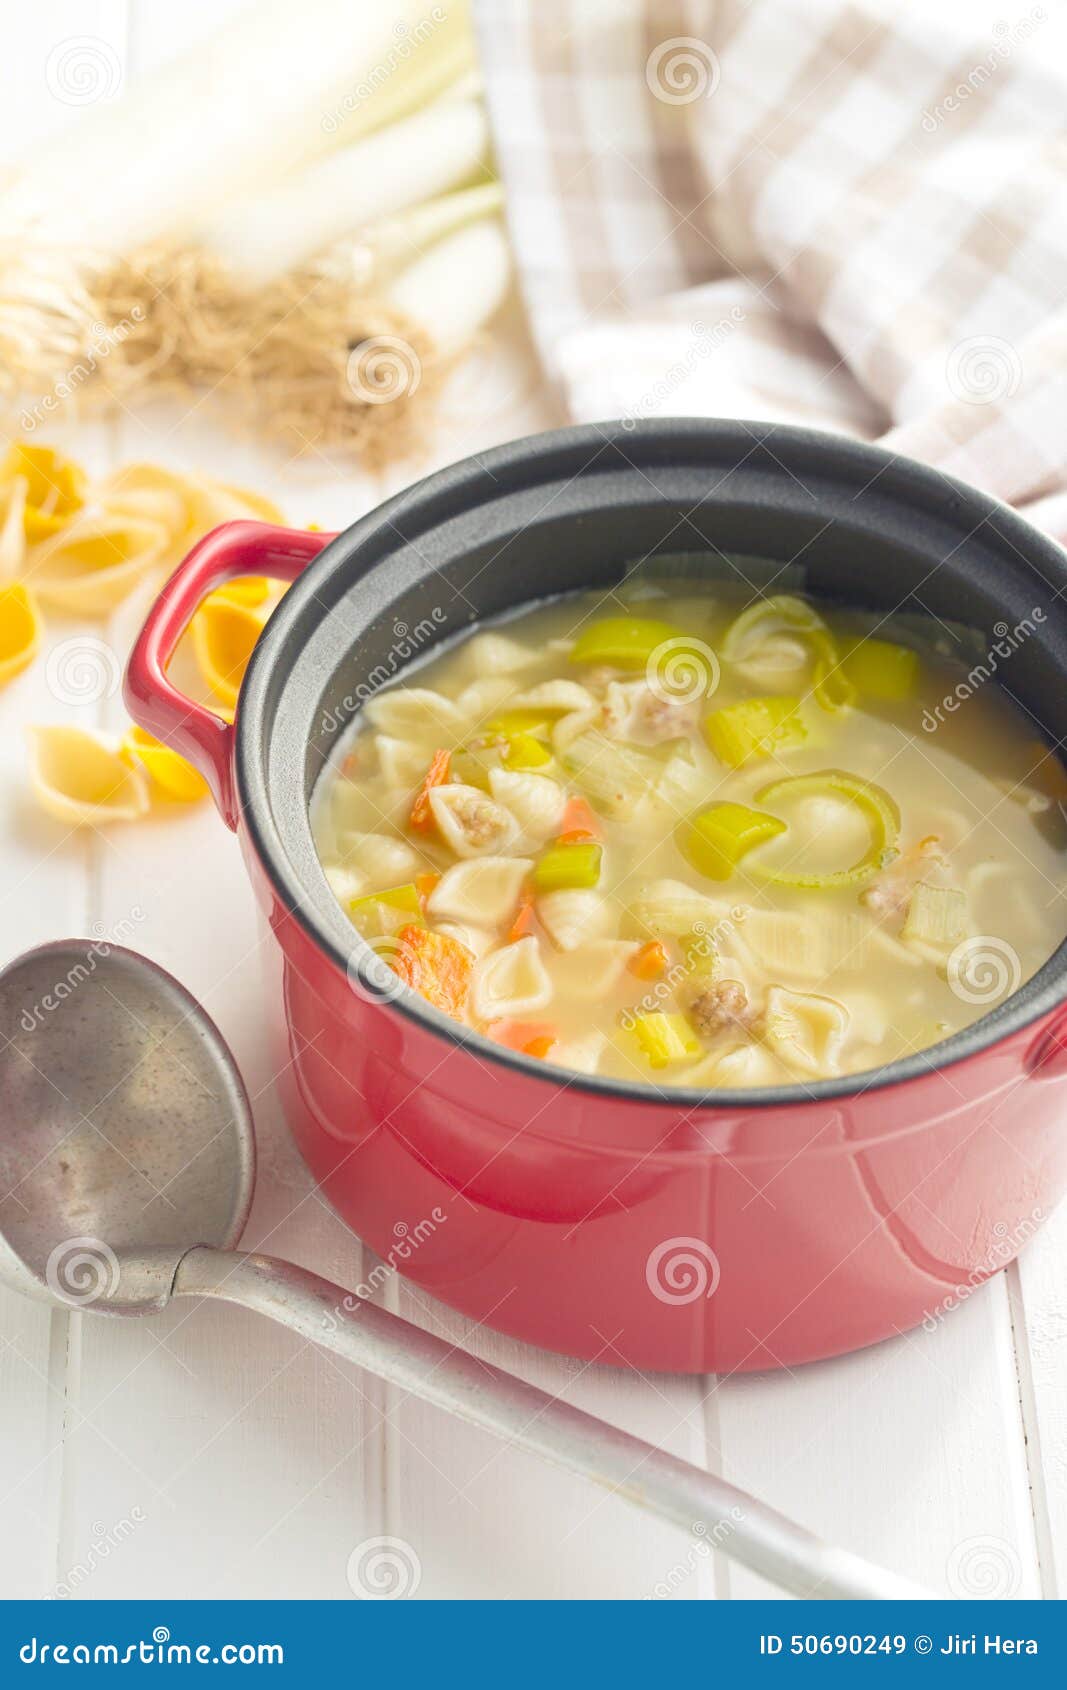 Vegetable soup with pasta stock image. Image of spoon - 50690249